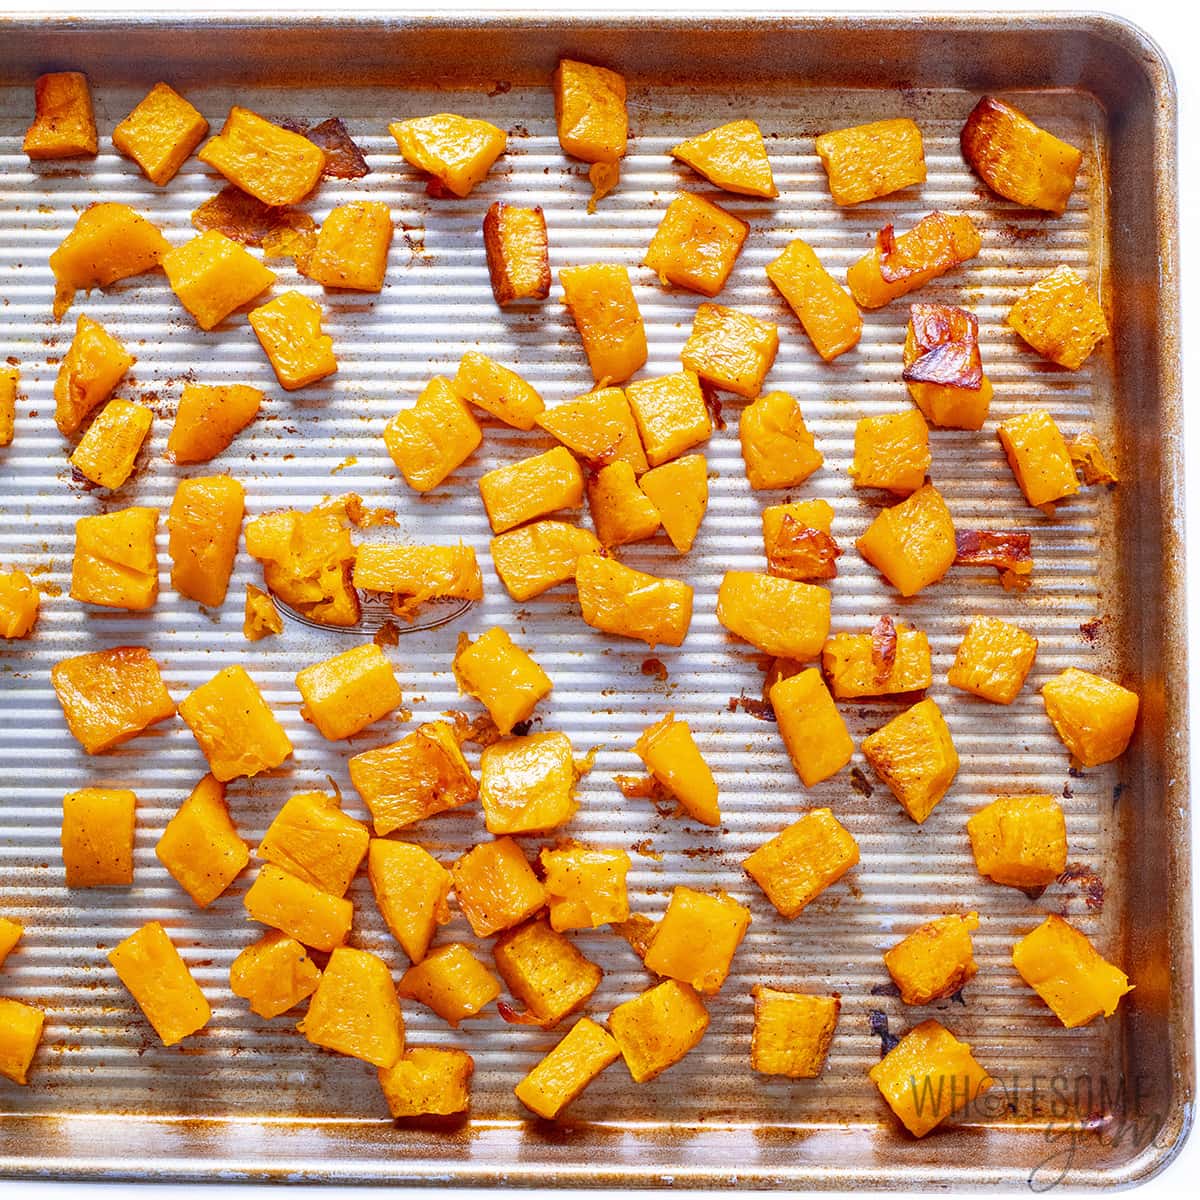 Roasted butternut squash on a baking pan.